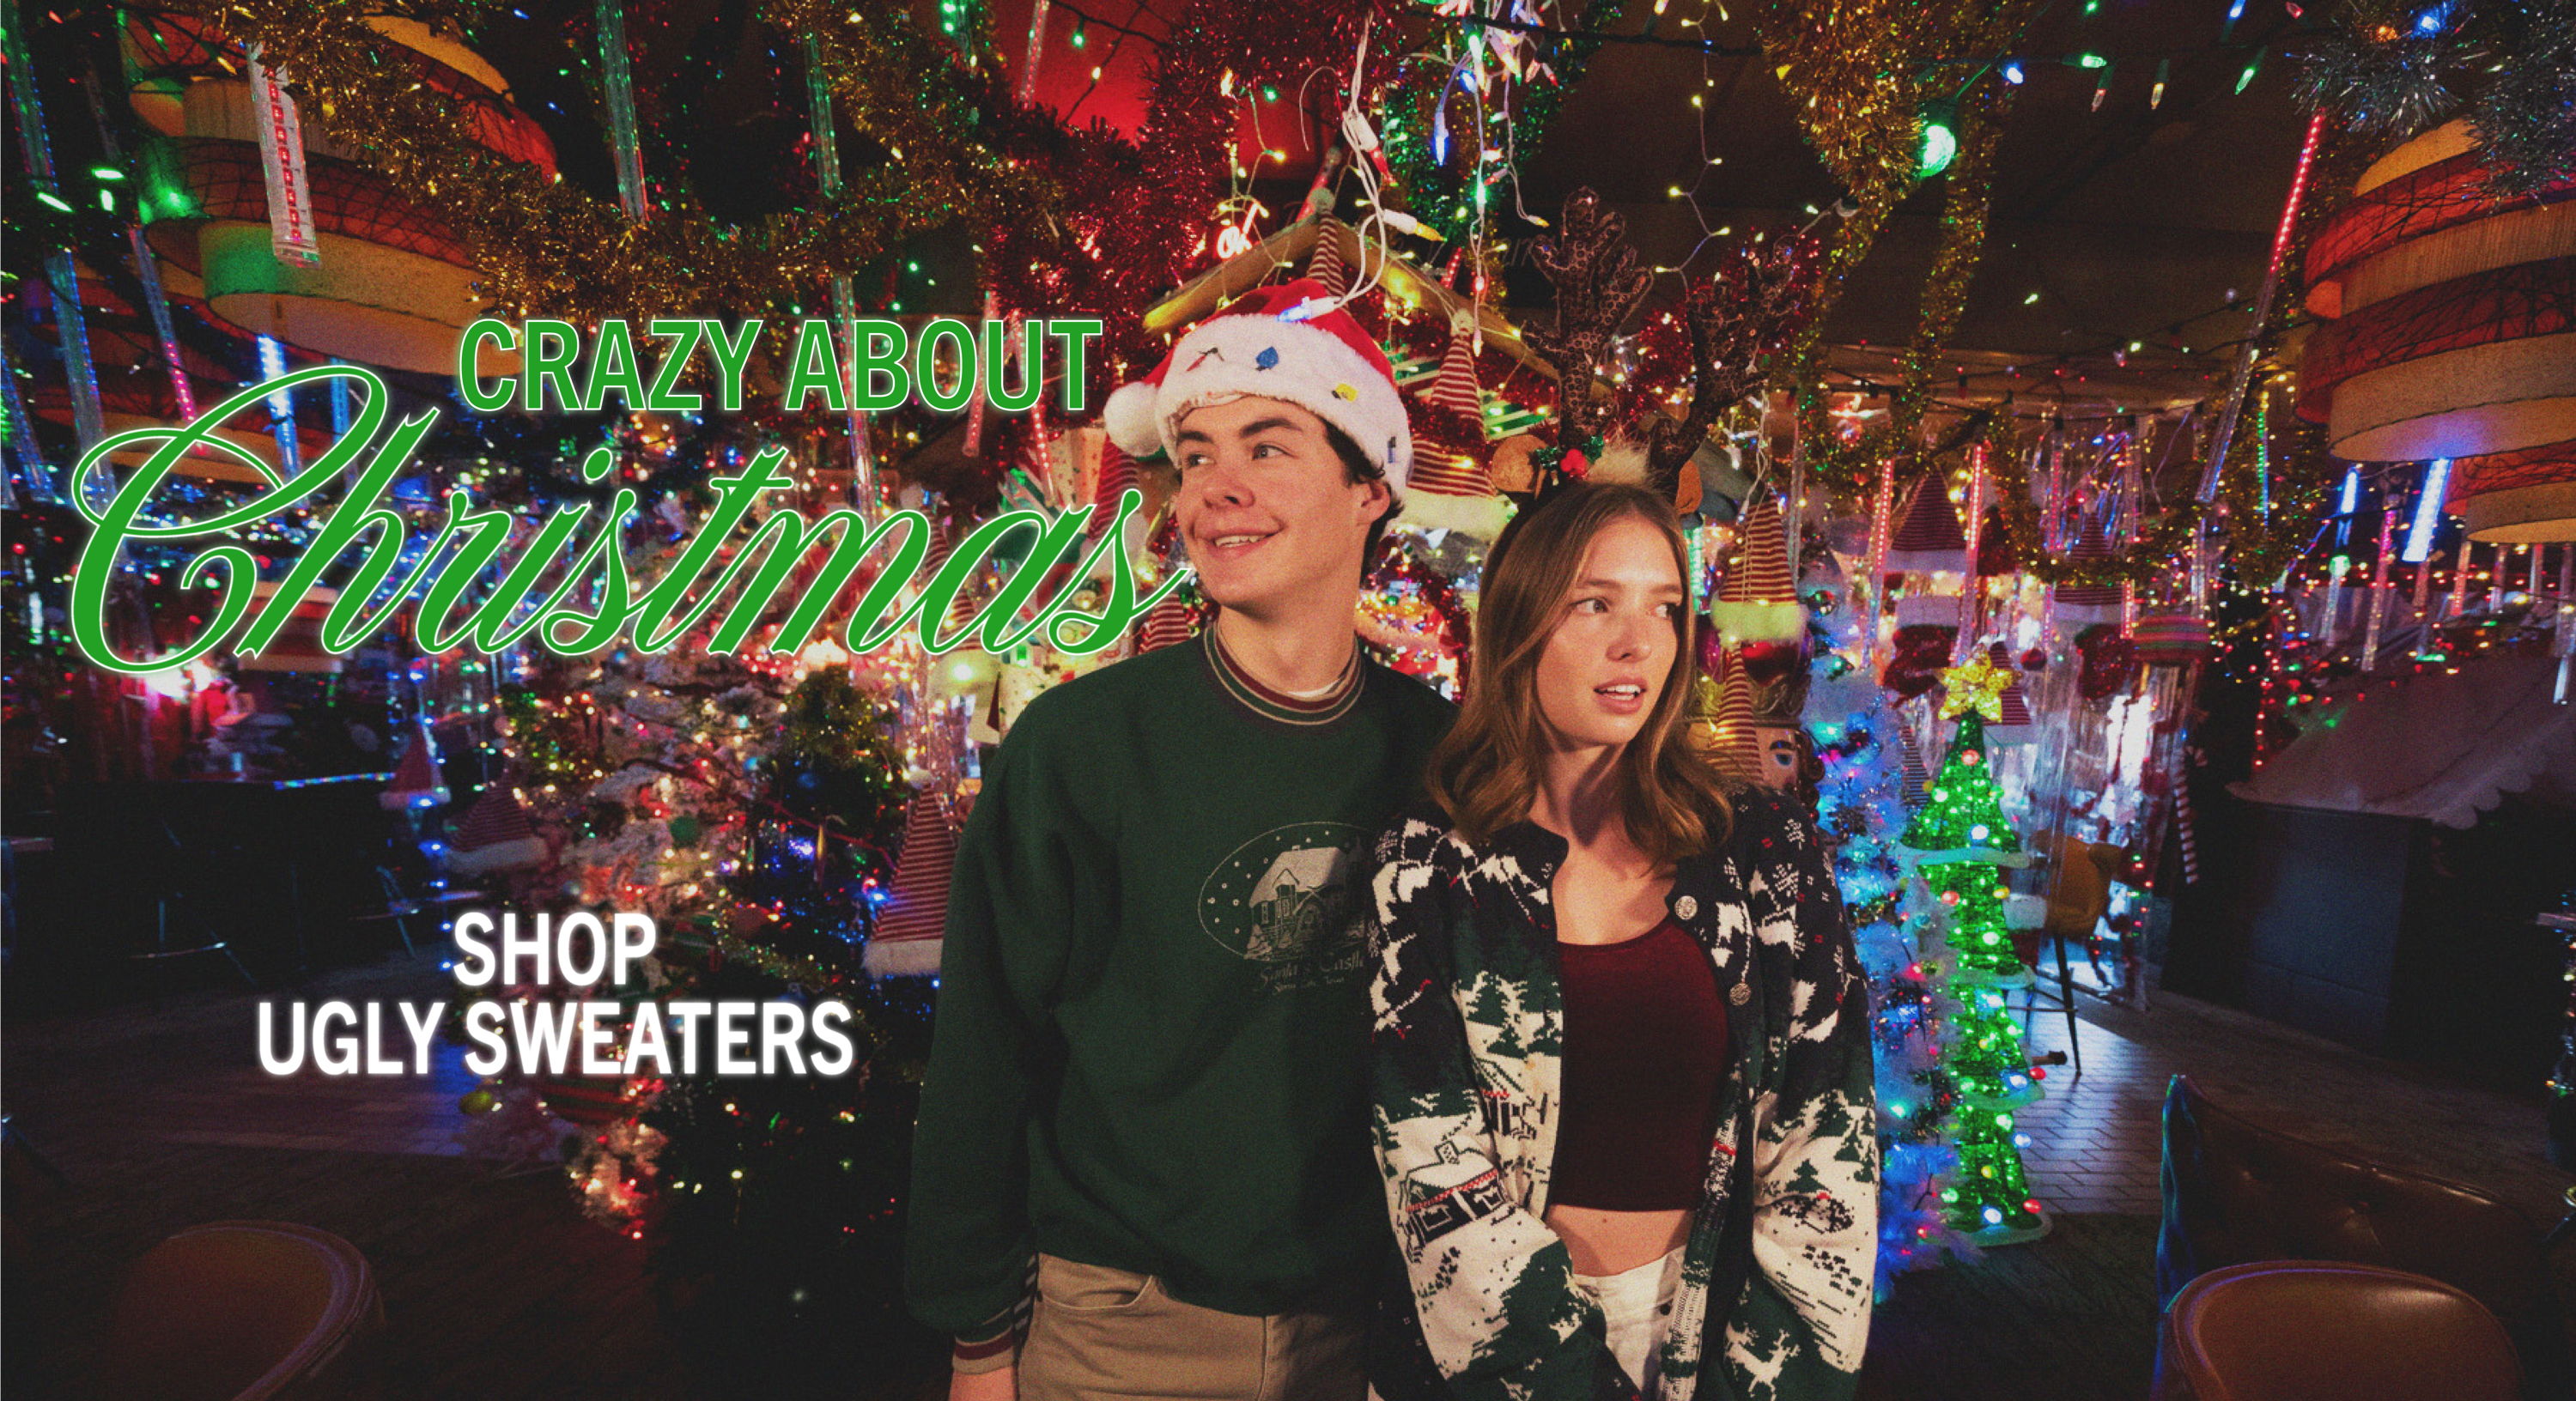 Crazy about Christmas! Shop ugly sweaters.